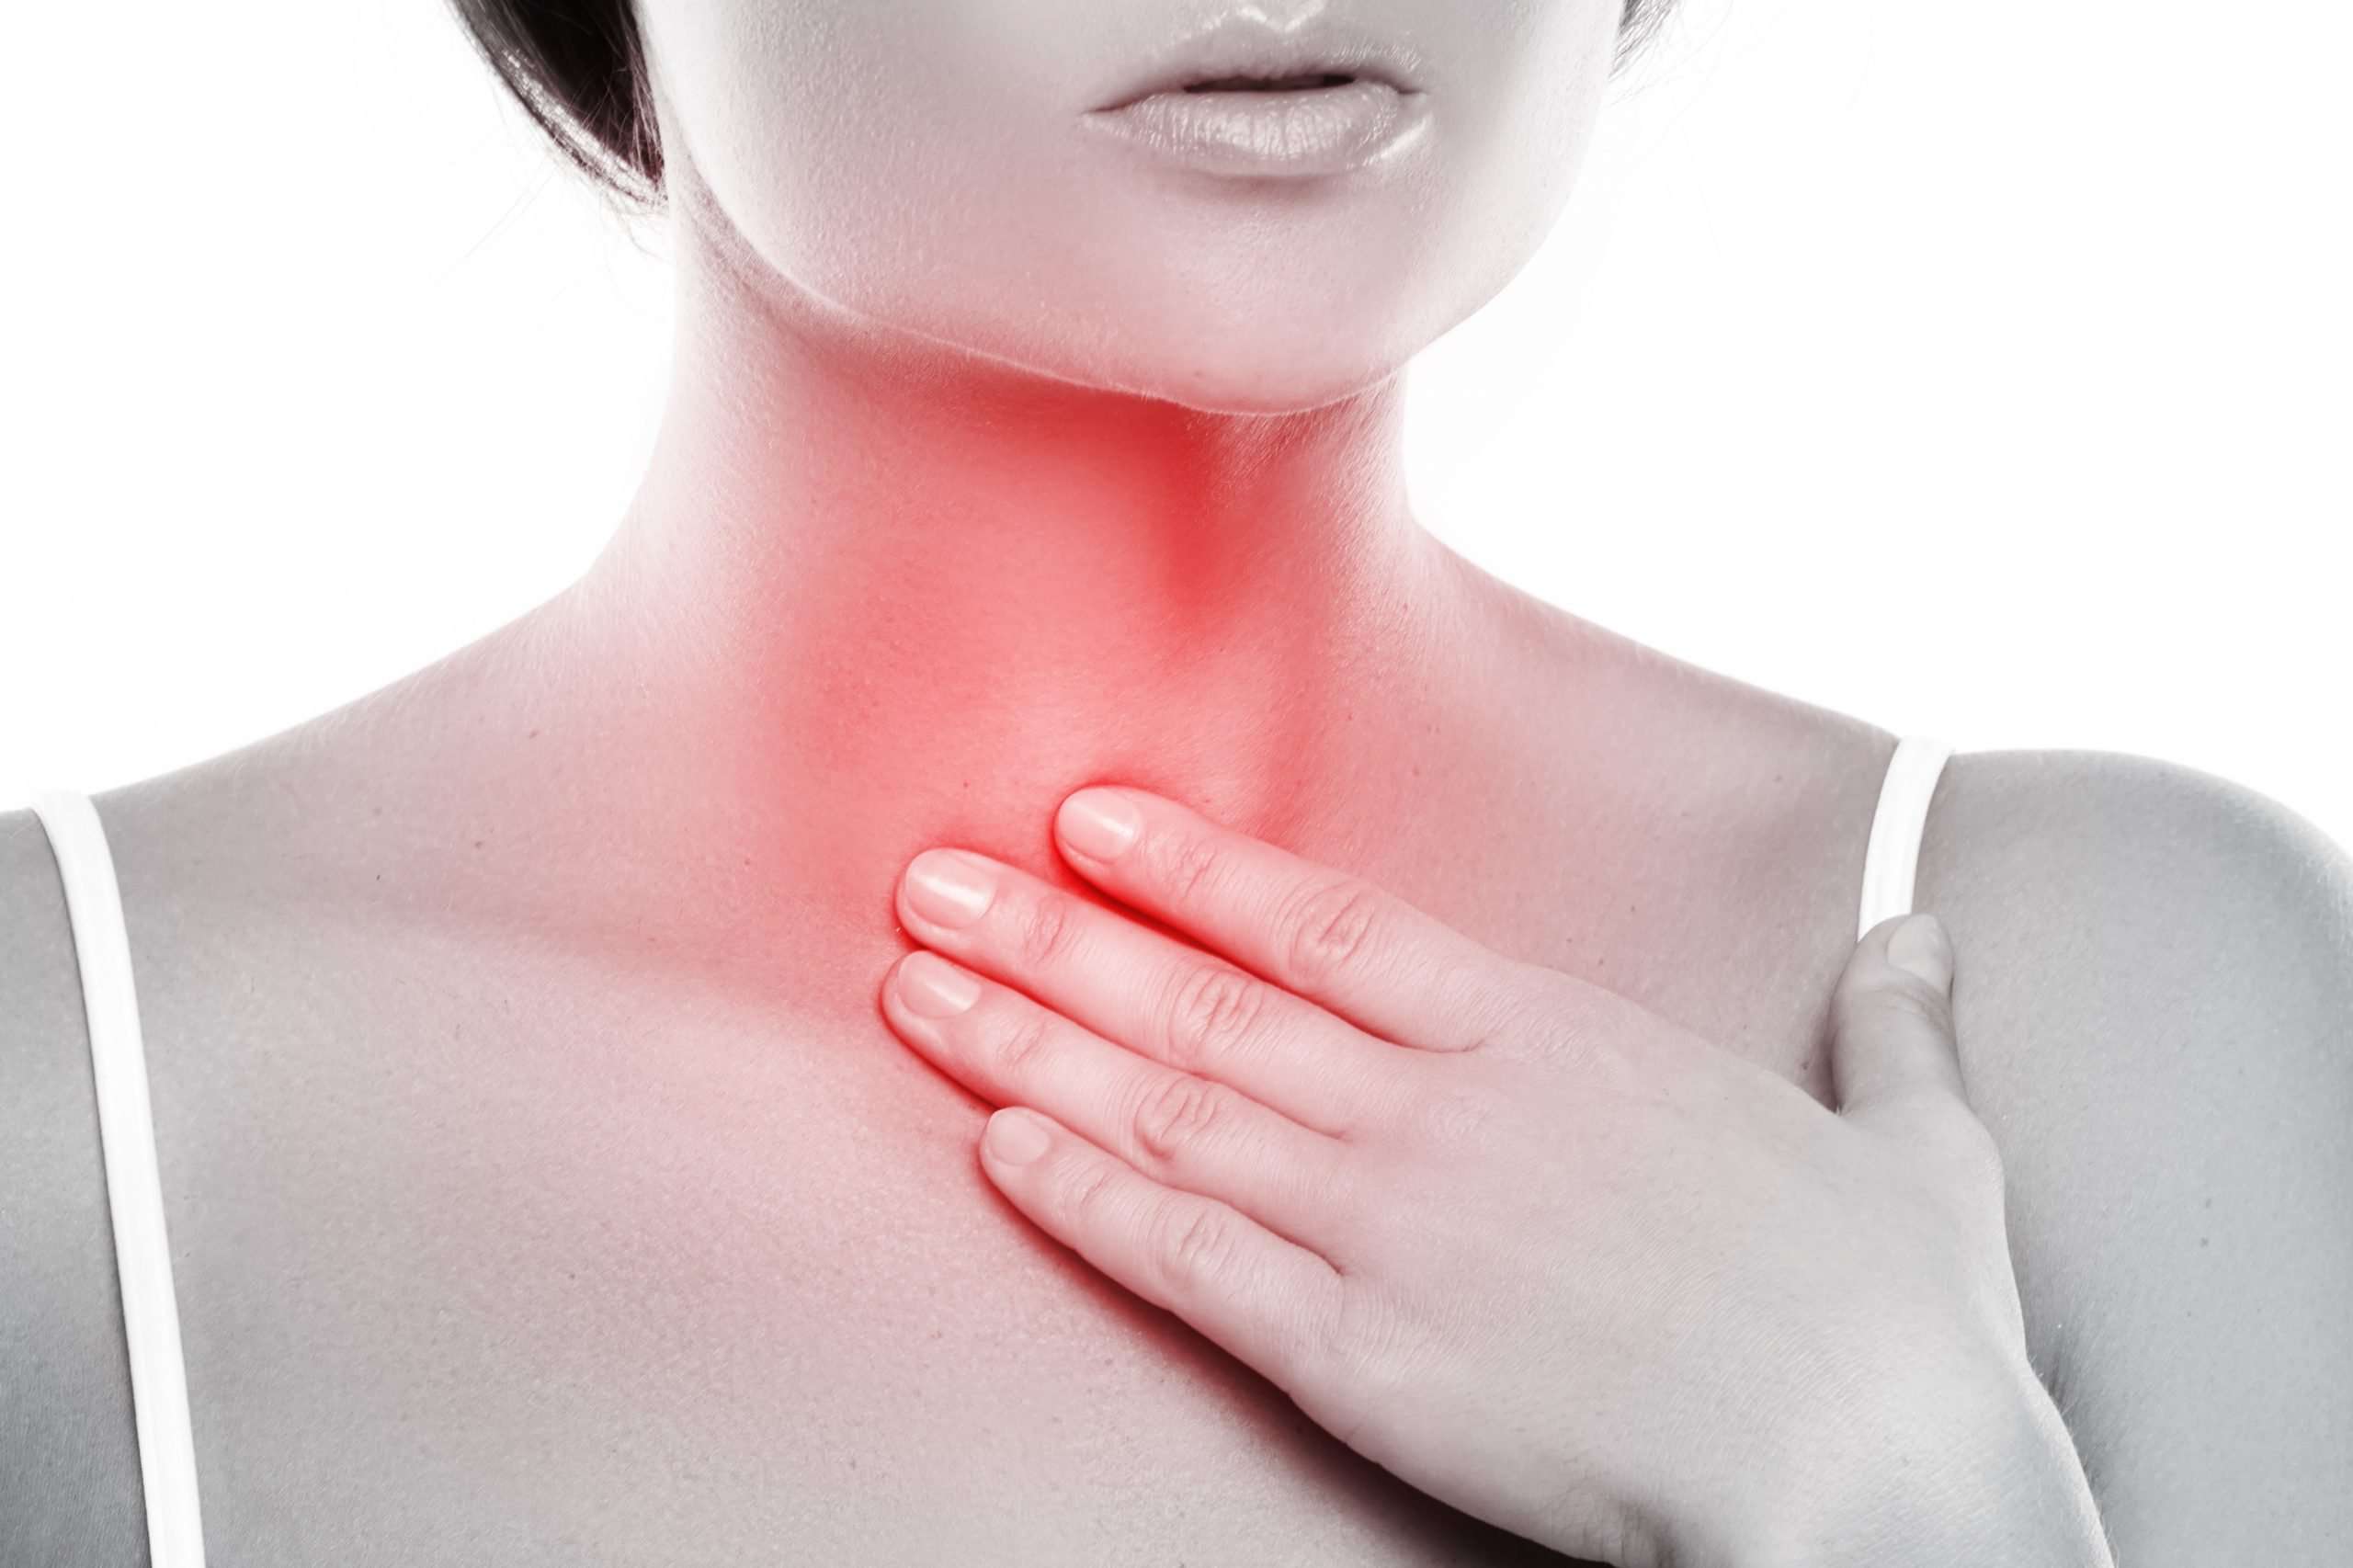 Losing Your Voice? Whatâs Going On in Your Body â Health ...